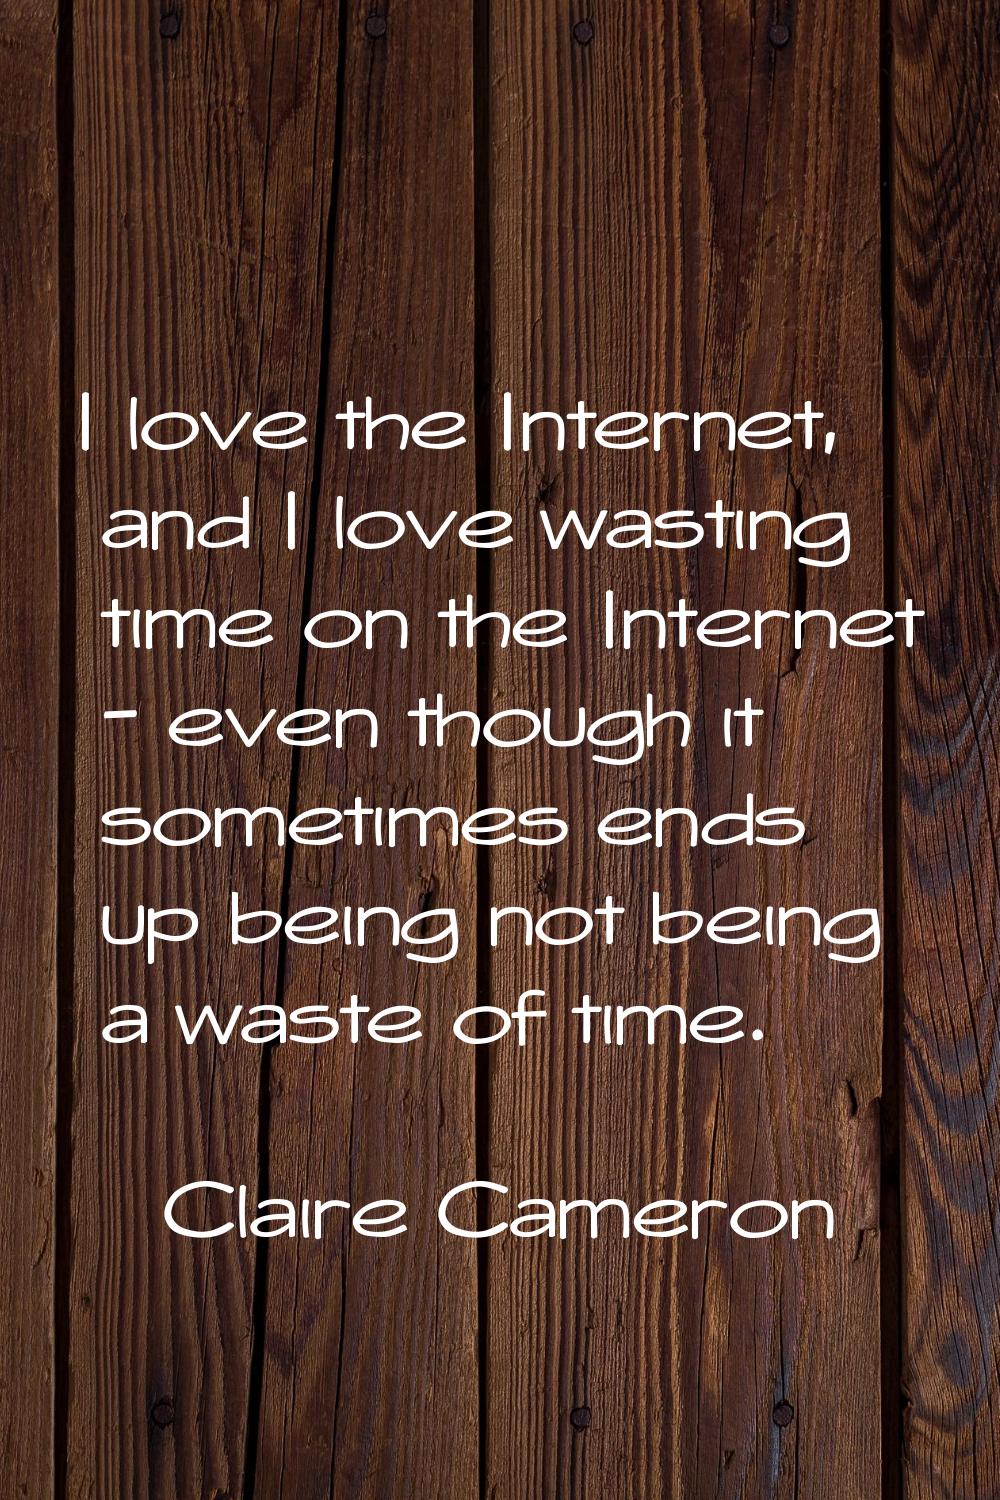 I love the Internet, and I love wasting time on the Internet - even though it sometimes ends up bei